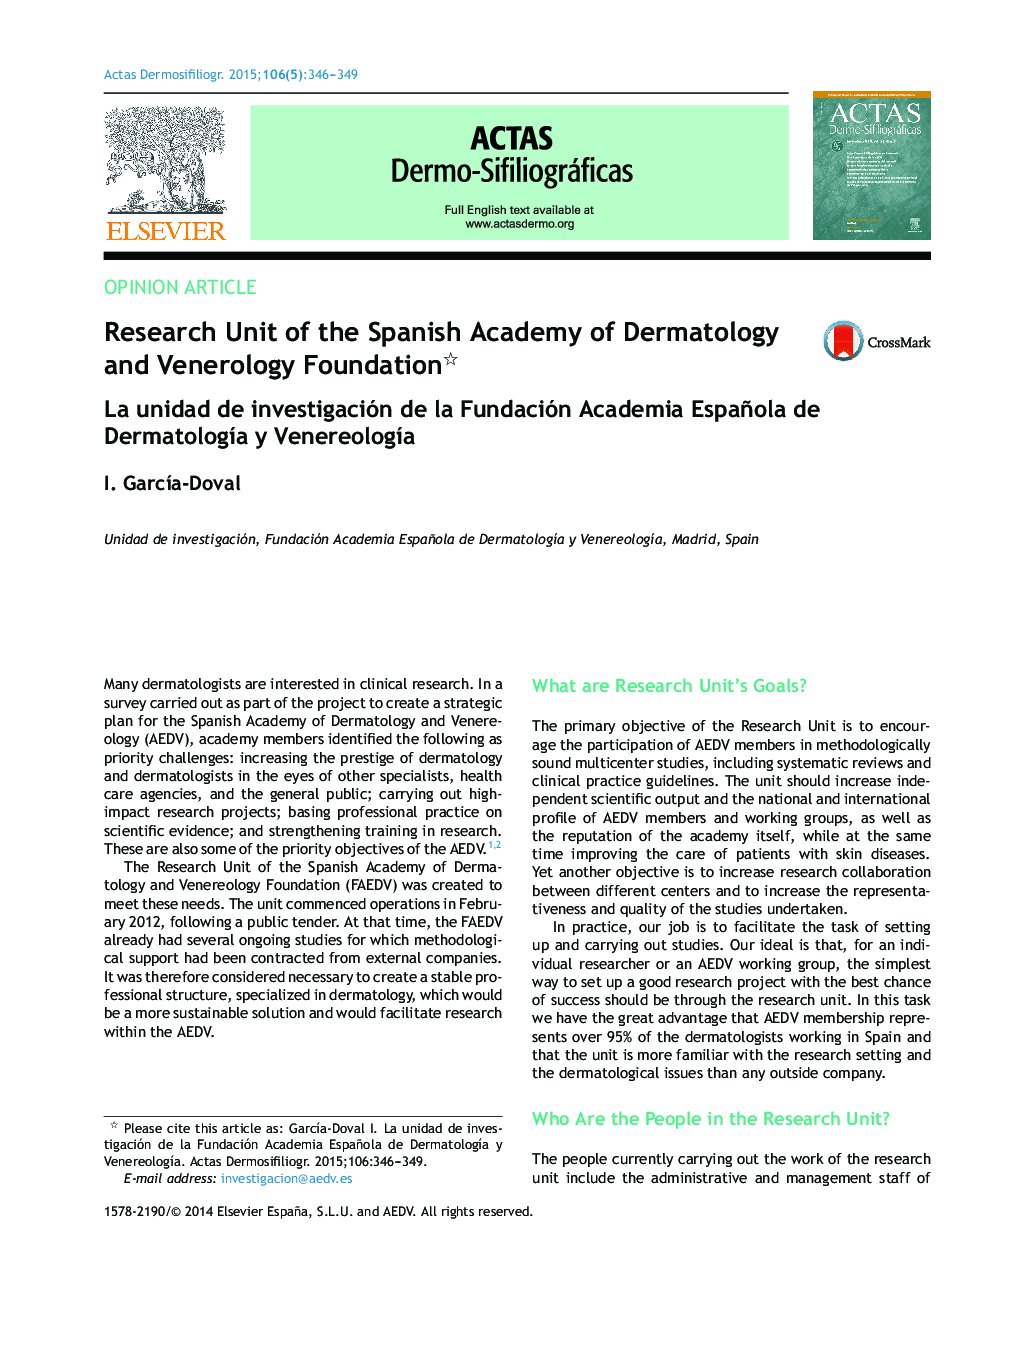 Research Unit of the Spanish Academy of Dermatology and Venerology Foundation